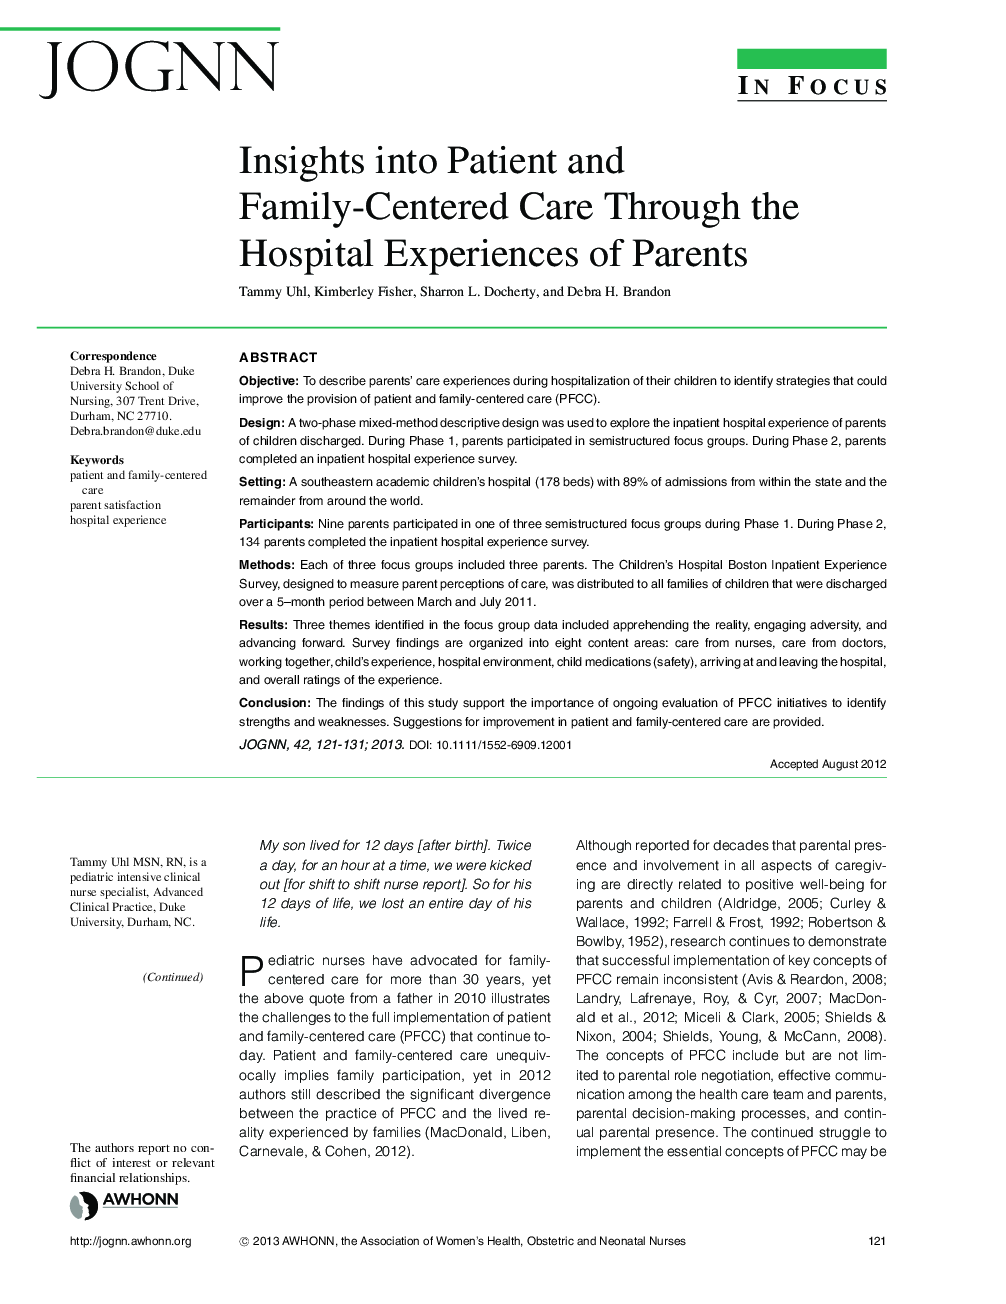 Insights into Patient and FamilyâCentered Care Through the Hospital Experiences of Parents